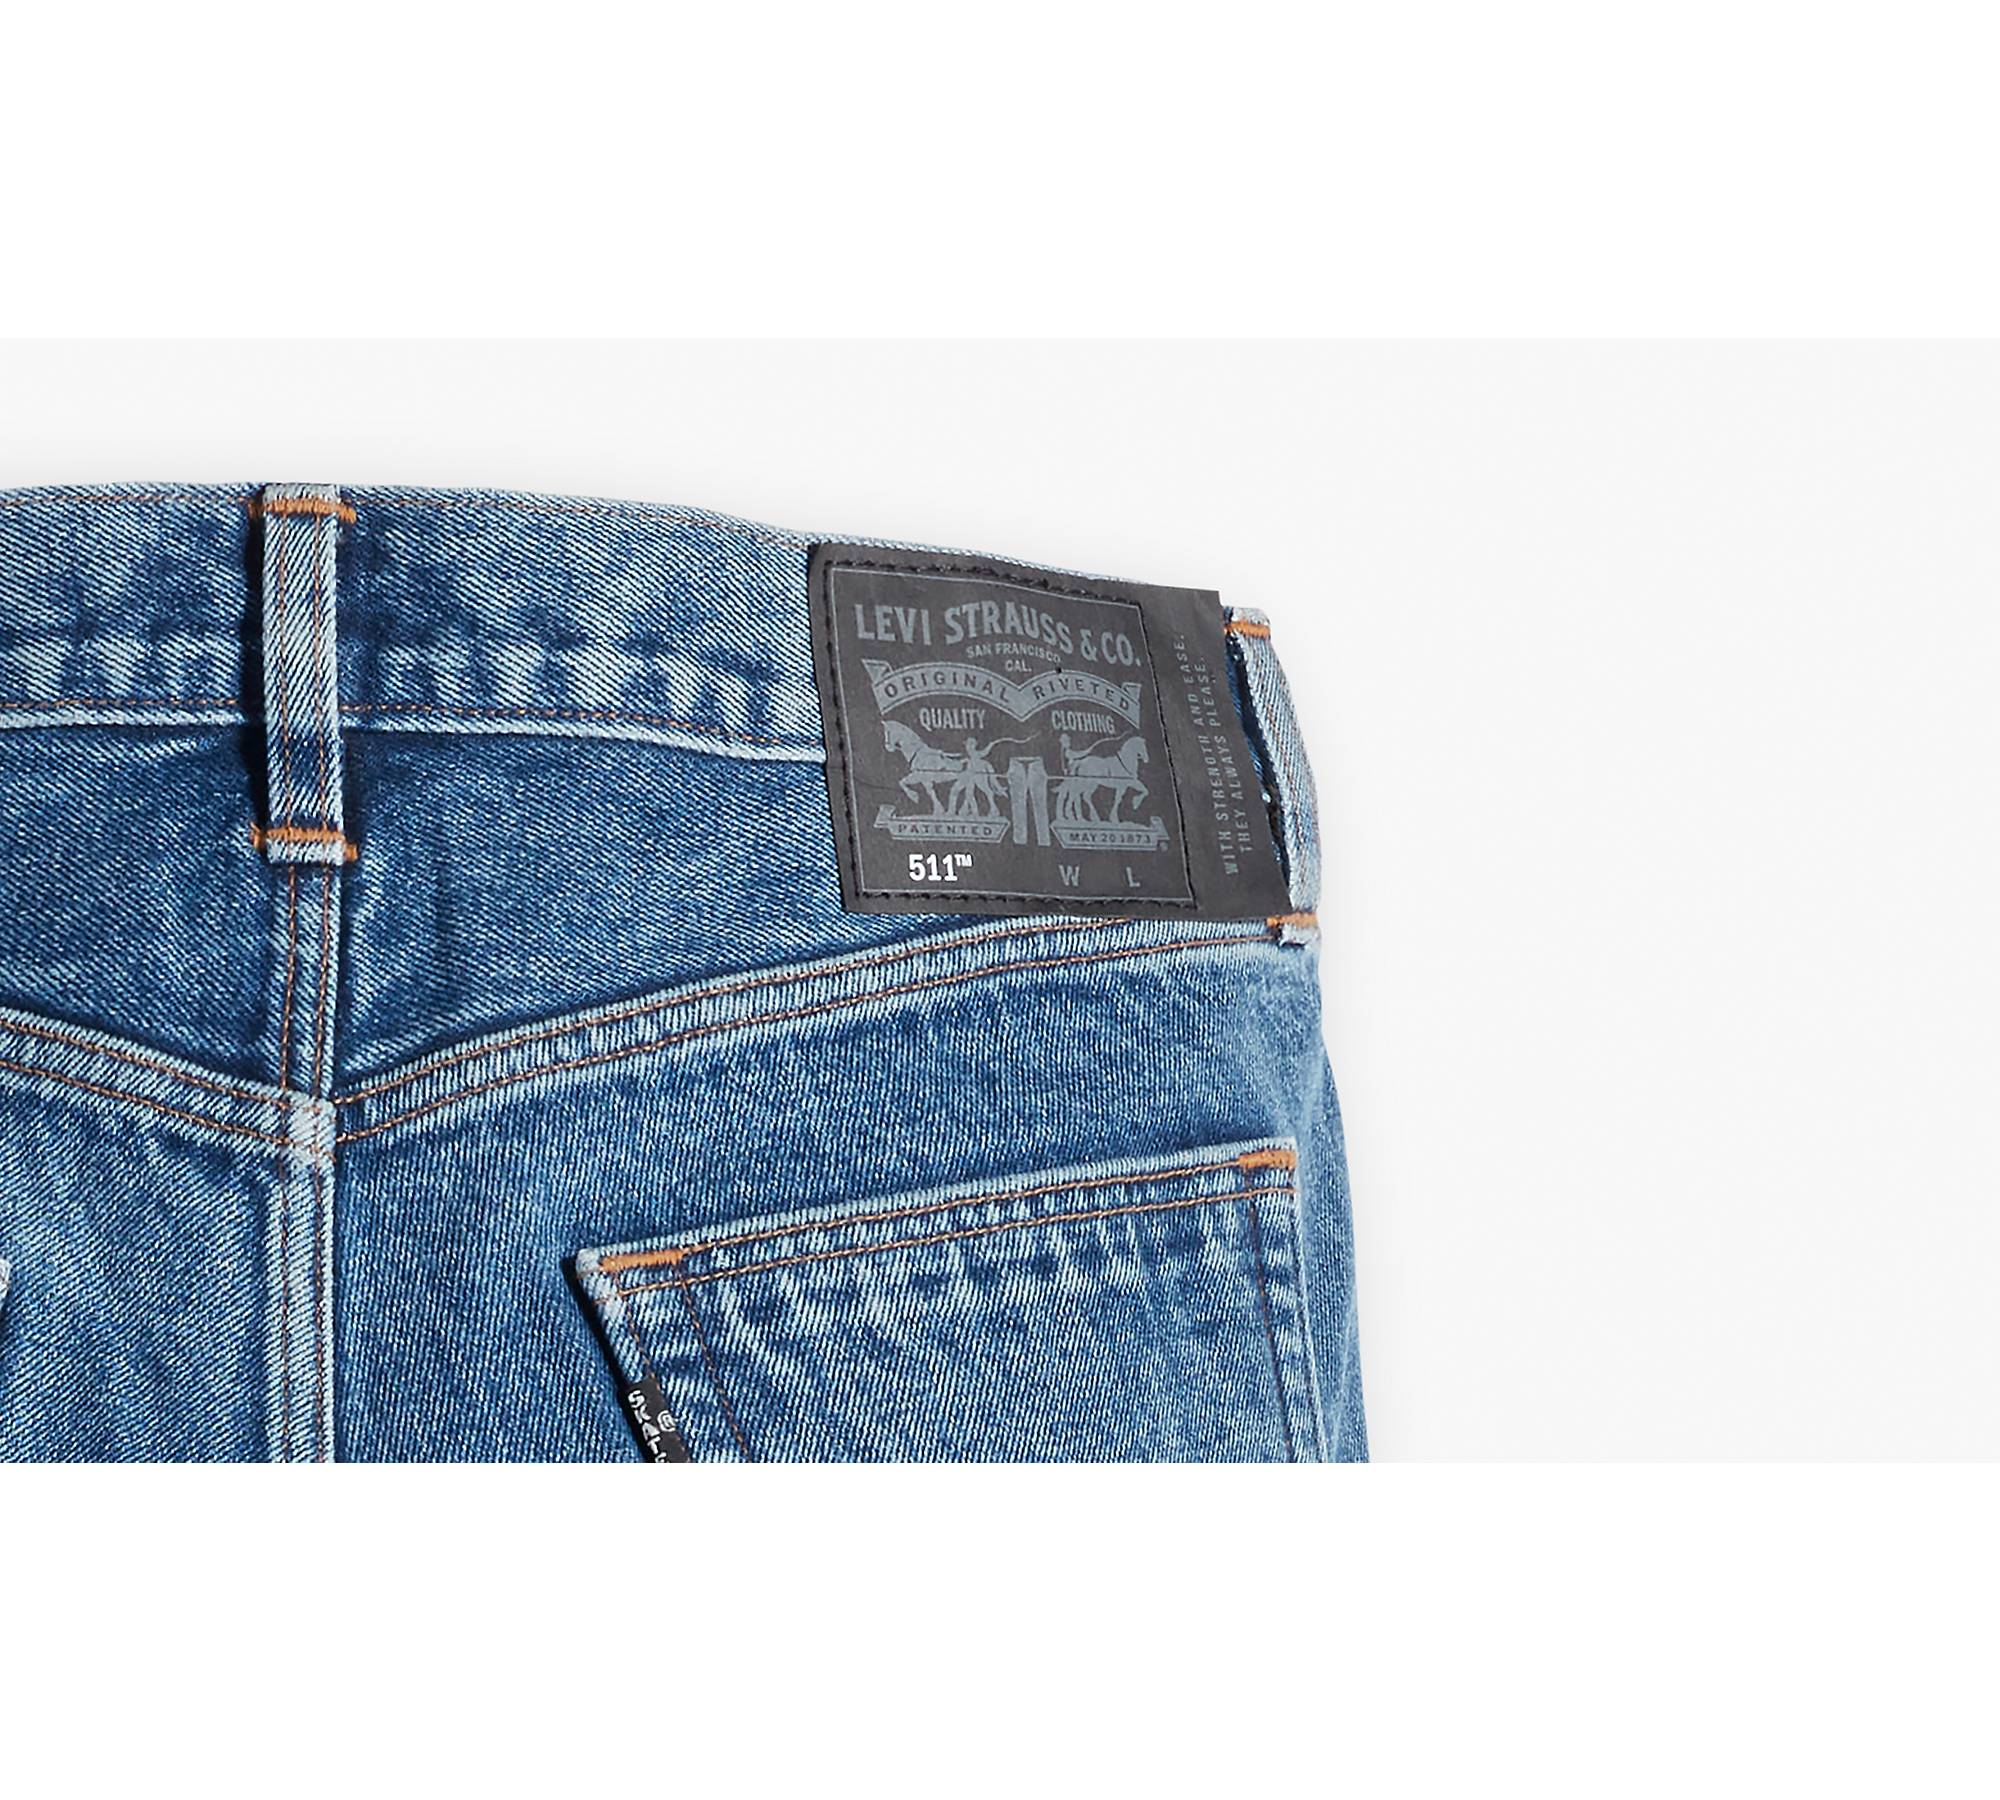 Levi's Two-Tone Skate Baggy Jeans